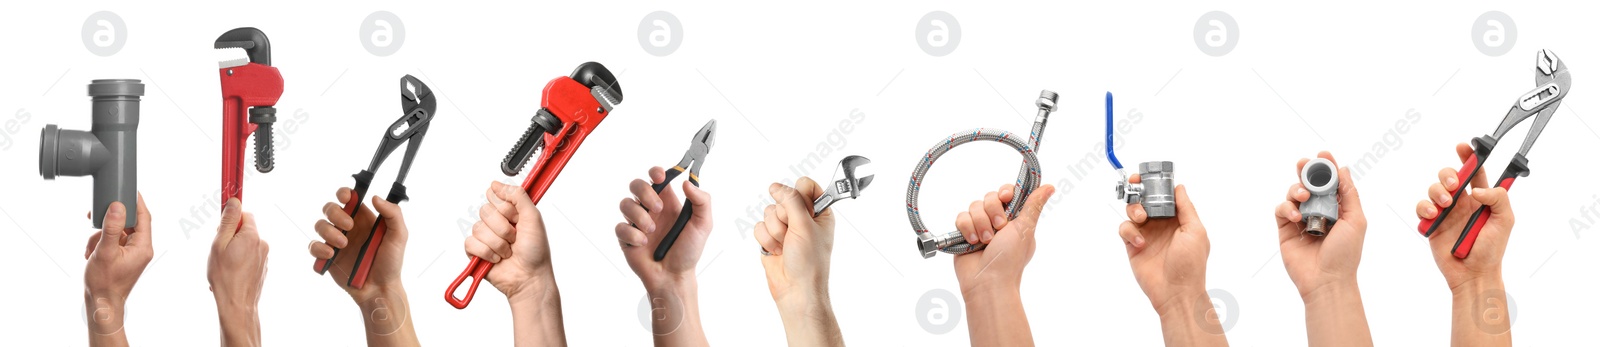 Image of Collage with photos of men holding different plumbing tools on white background. Banner design